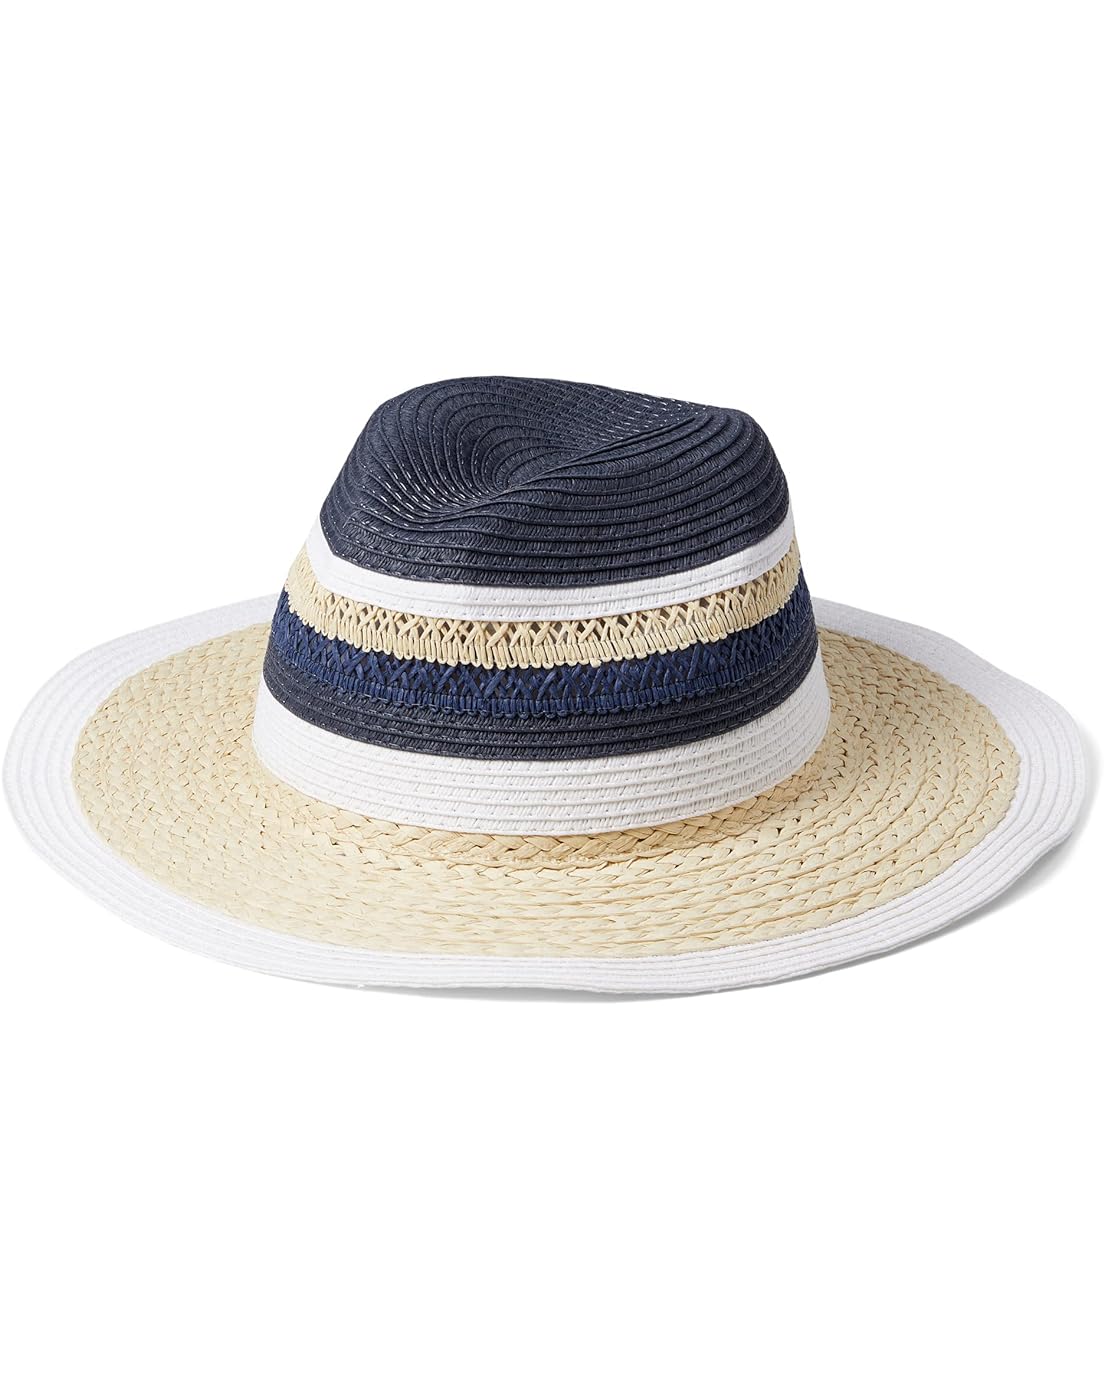 Badgley Mischka Straw Fedora with Open Weave Detail and Contrast Stripes Combo